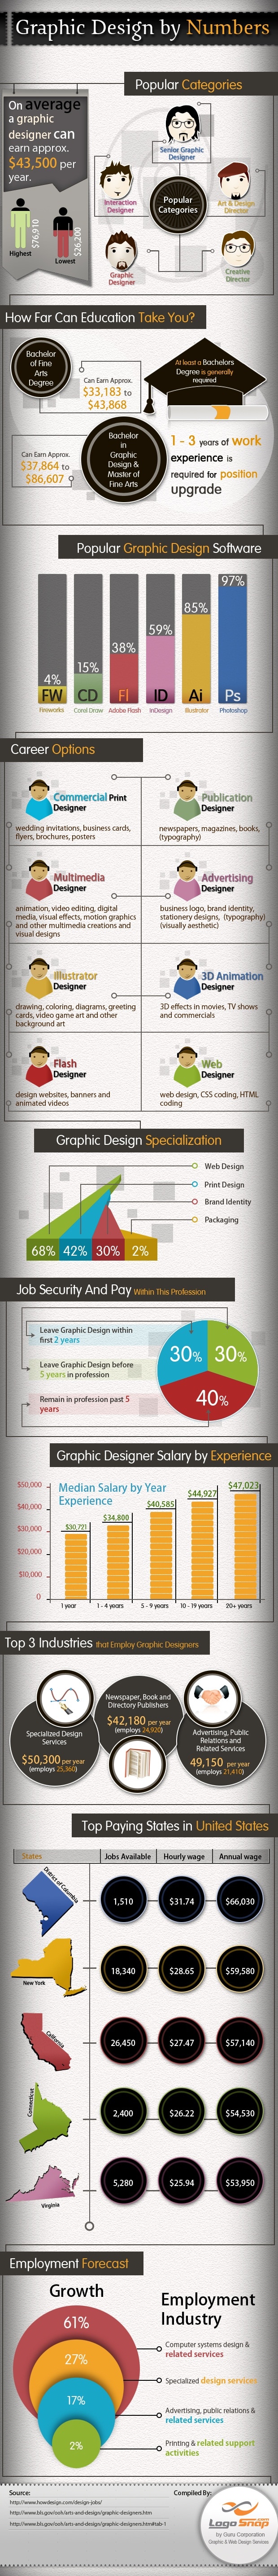 In-Depth Look At The Graphic Design Career [Infographic]